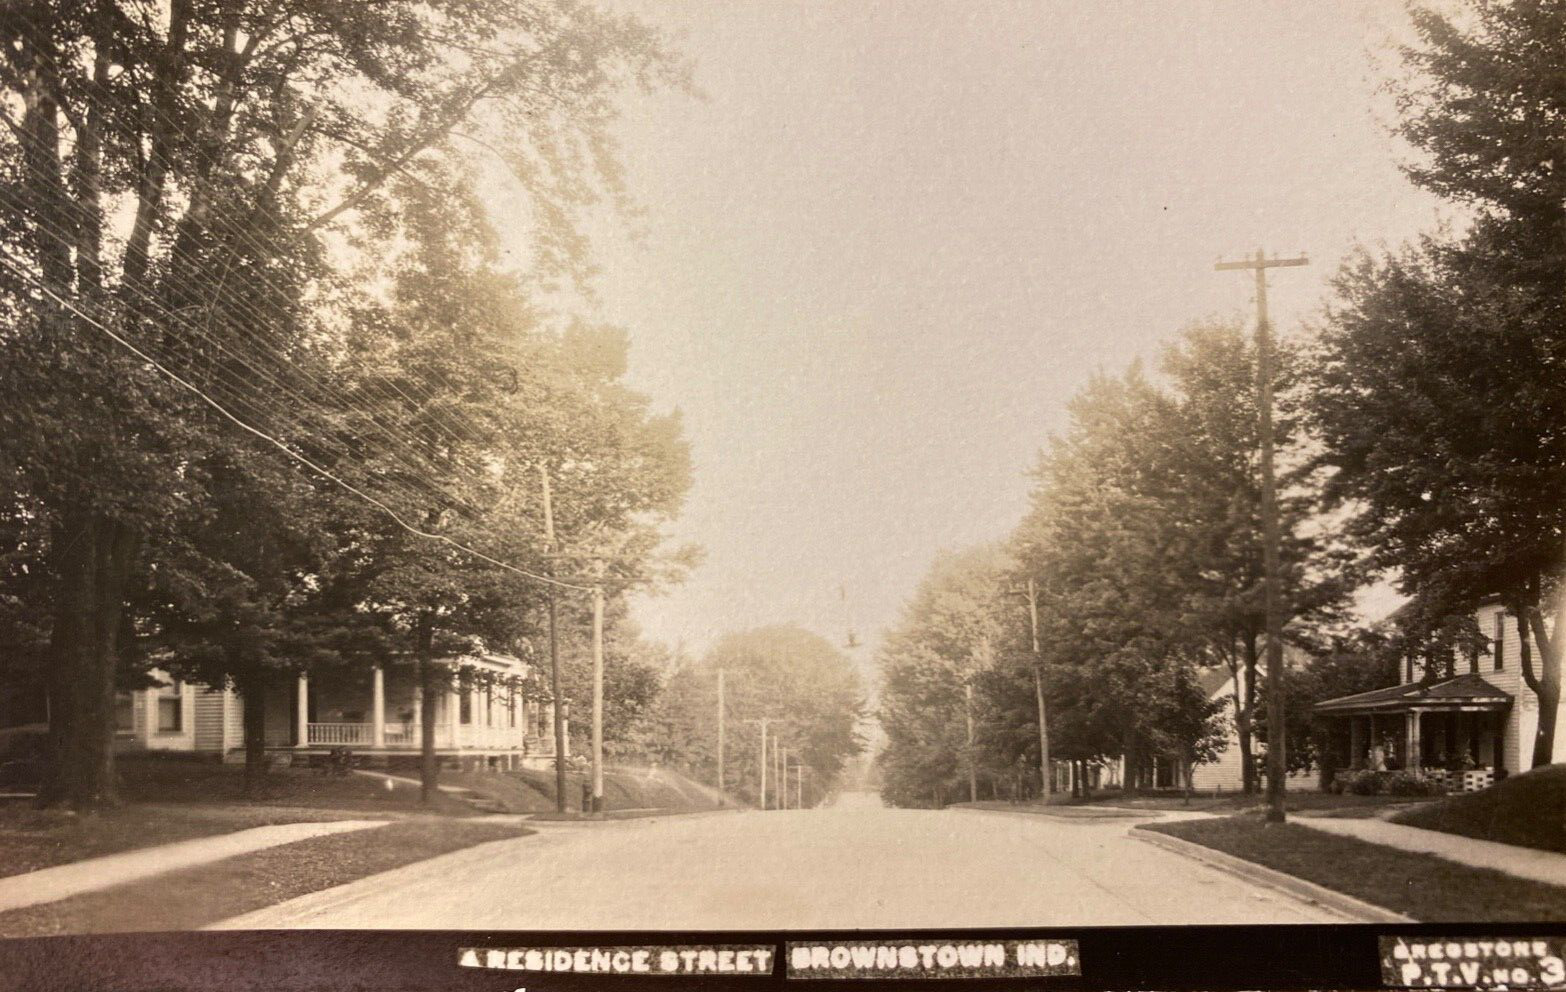 1926 RPPC - BROWNSTOWN, INDIANA antique real photo postcard A RESIDENCE STREET